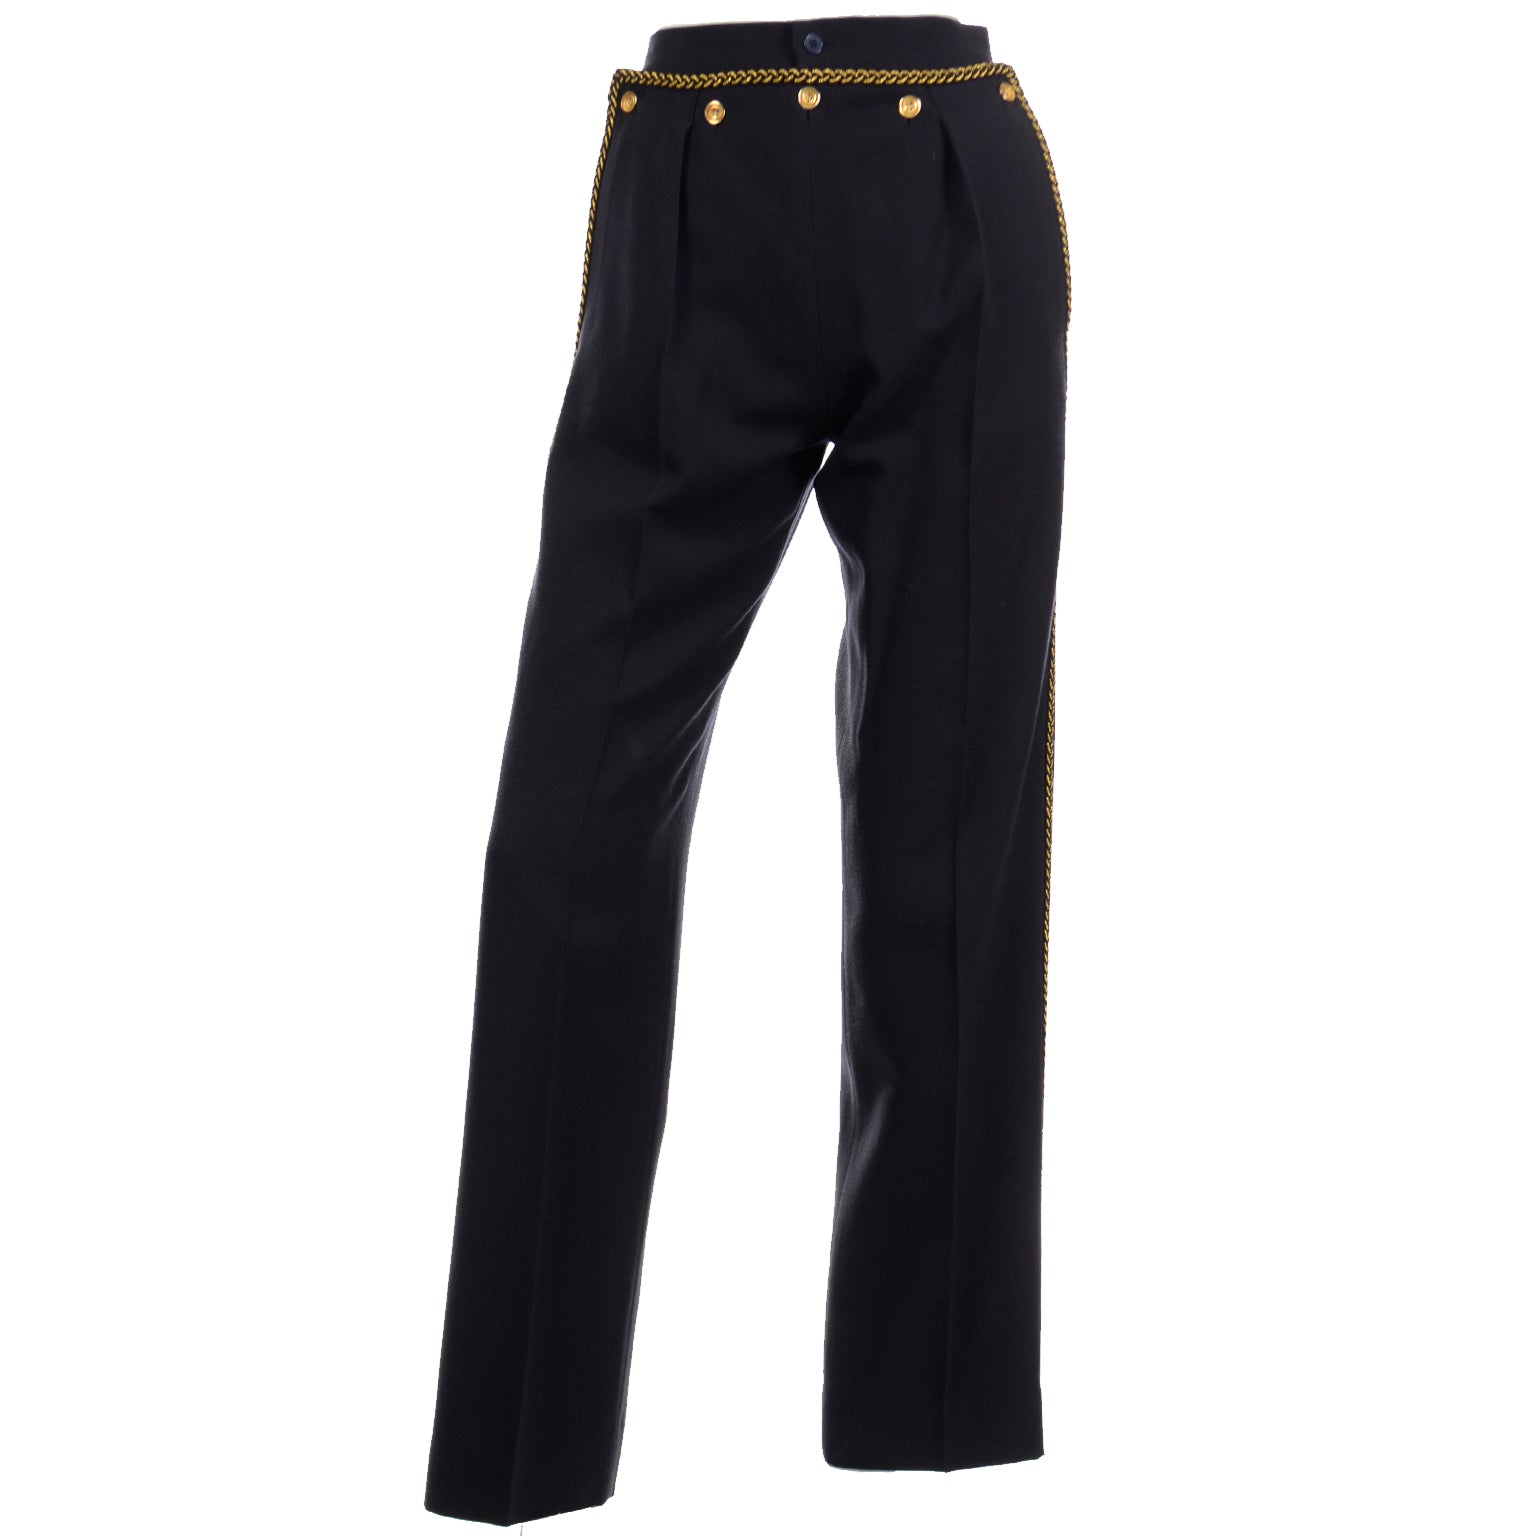 The Essential Tailored Trouser from Yves St. Laurent - Threads